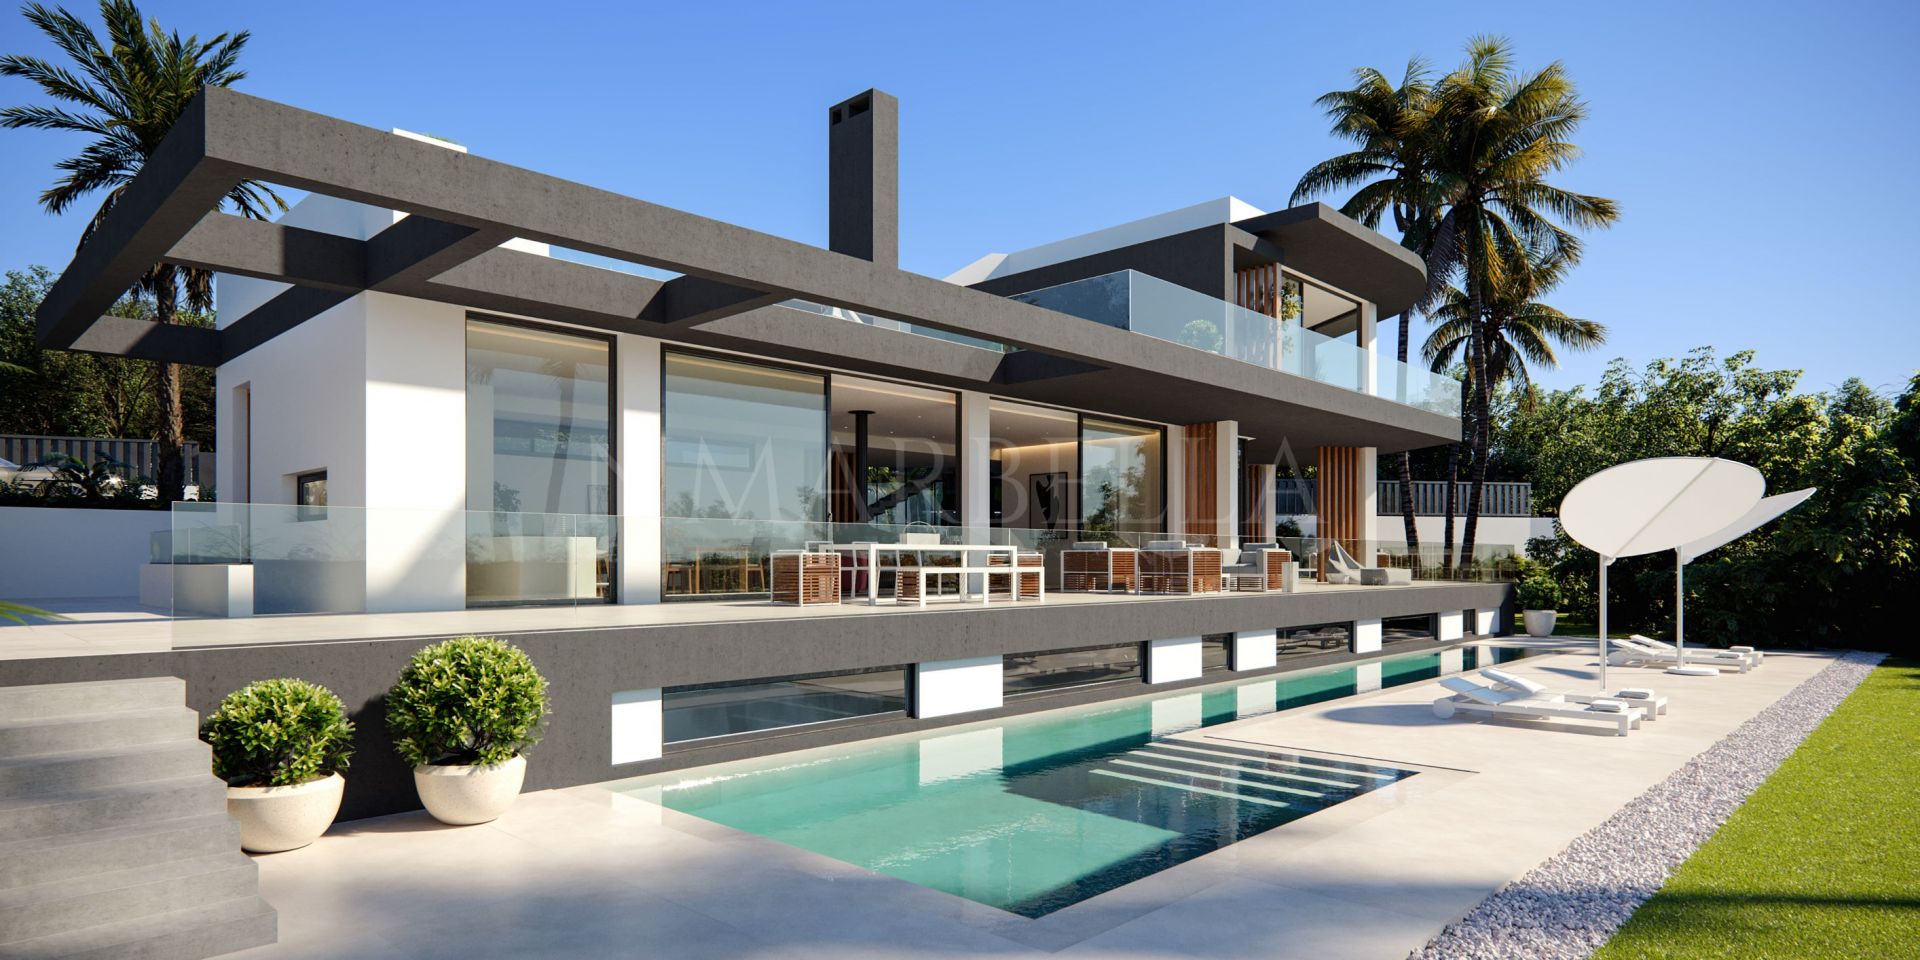 New off plan villa for sale on The Golden Mile Marbella